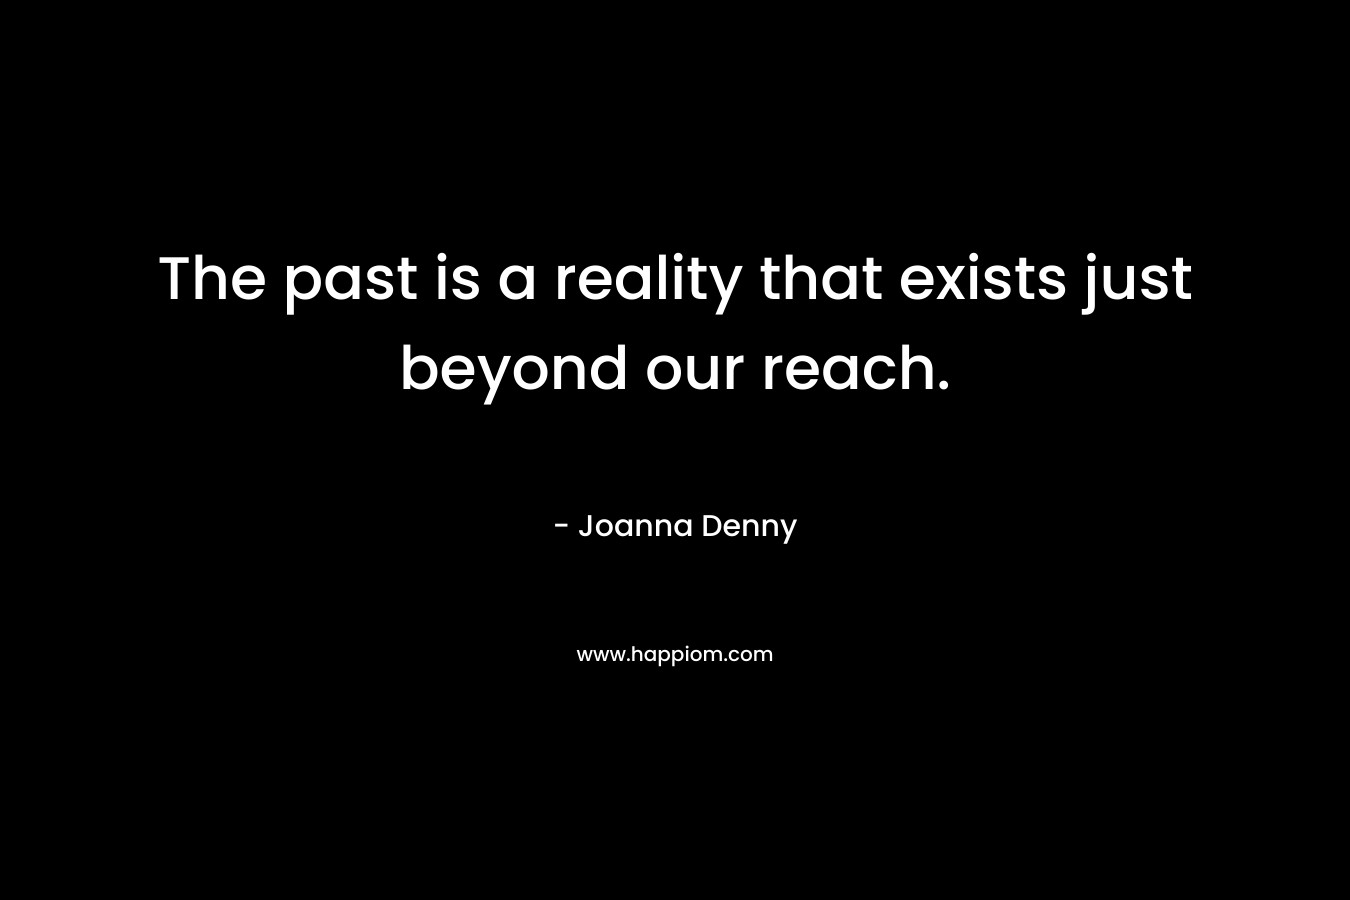 The past is a reality that exists just beyond our reach.